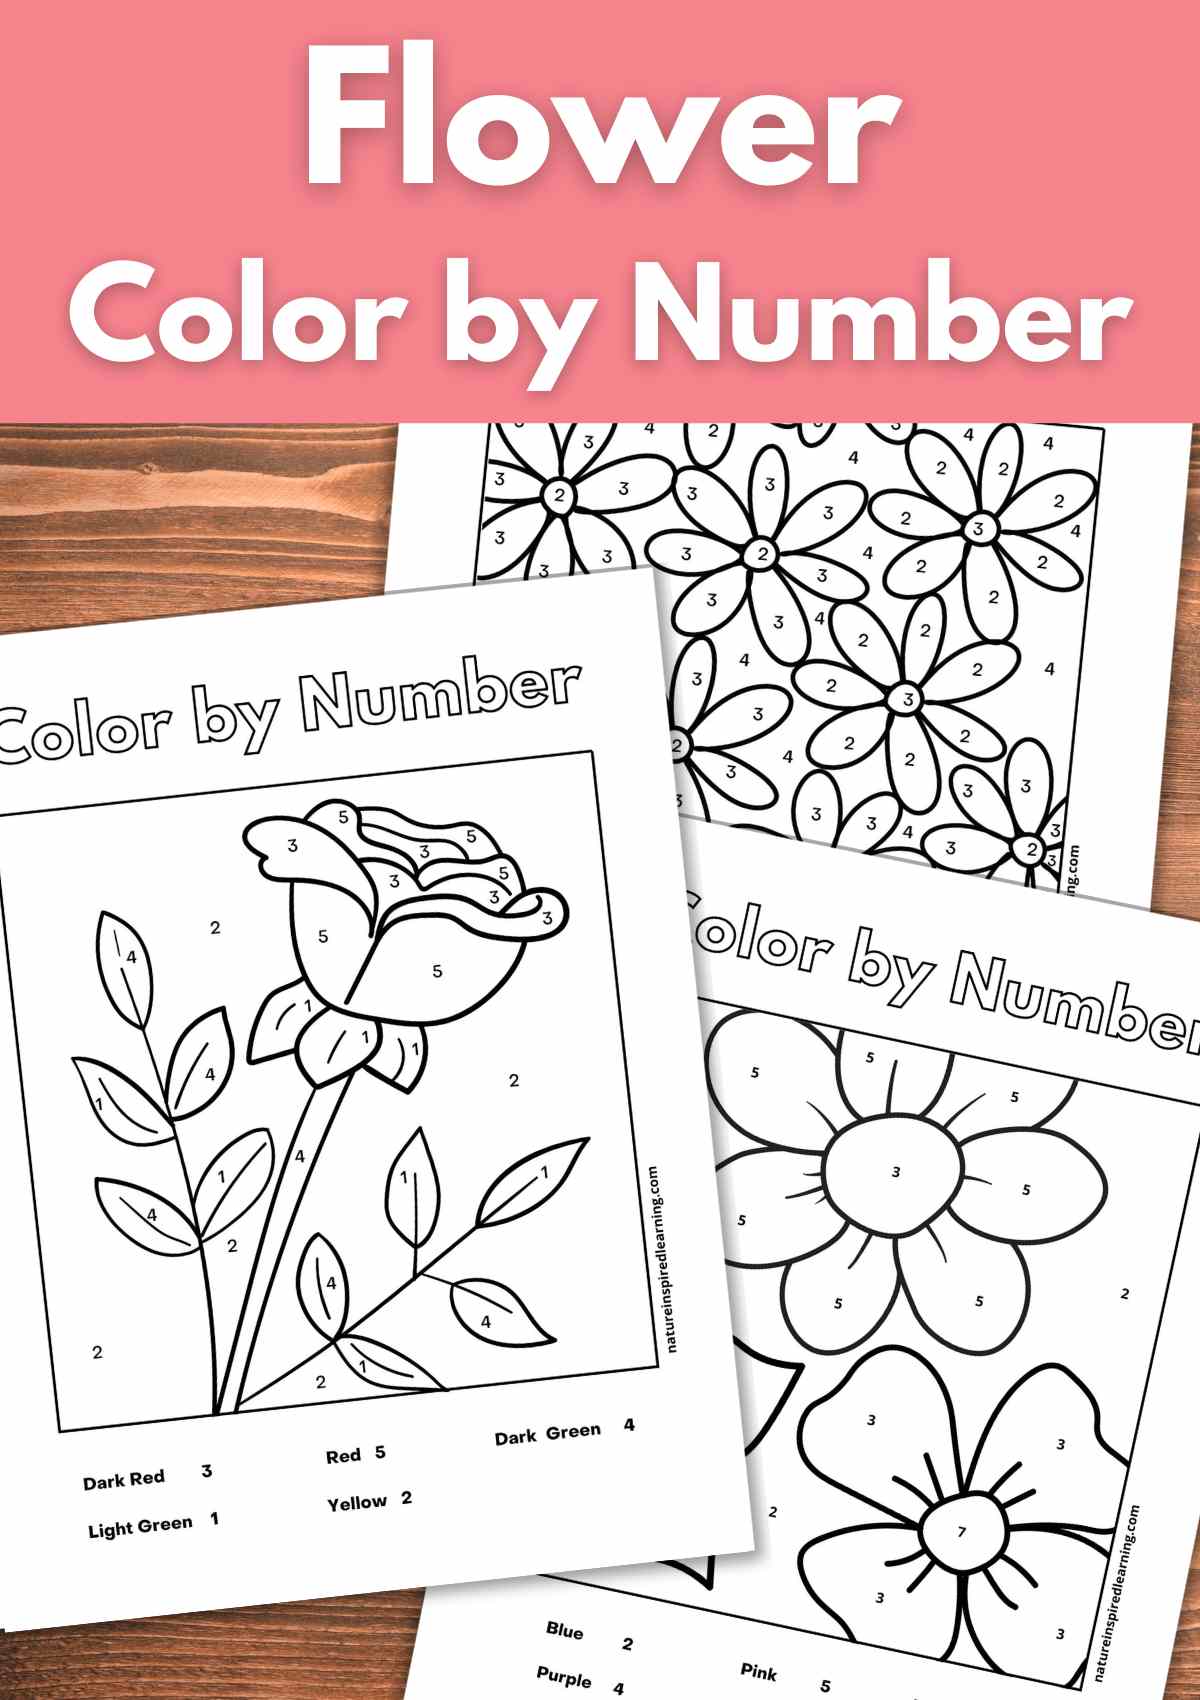 Flower Patterns Color By Number: An Adult Coloring Book with